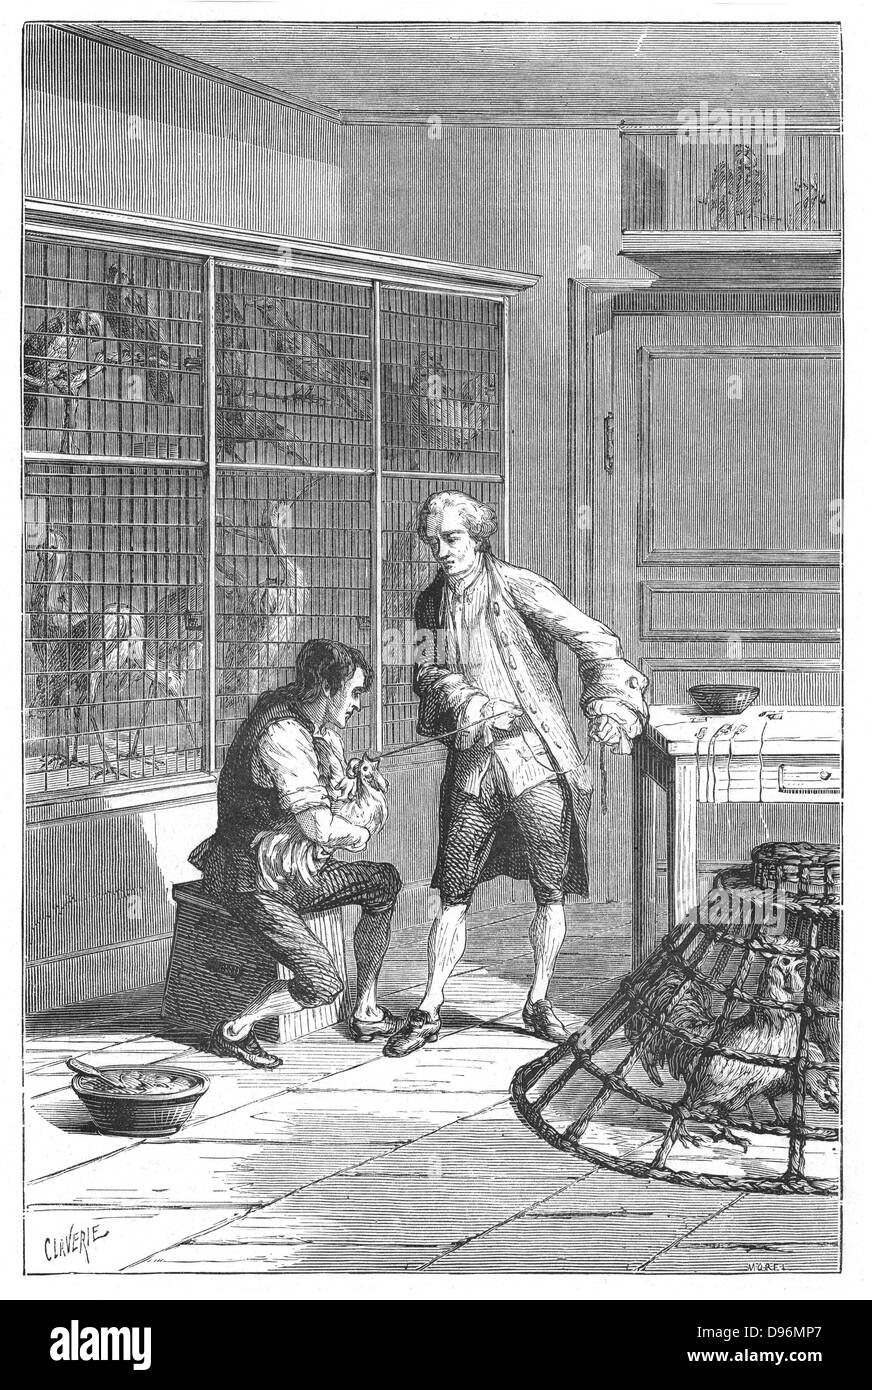 Lazaro Spallanzani (1729-1799),  Italian naturalist and biologist, investigating the digestive system of the chicken. Engraving published Paris 1874. Stock Photo